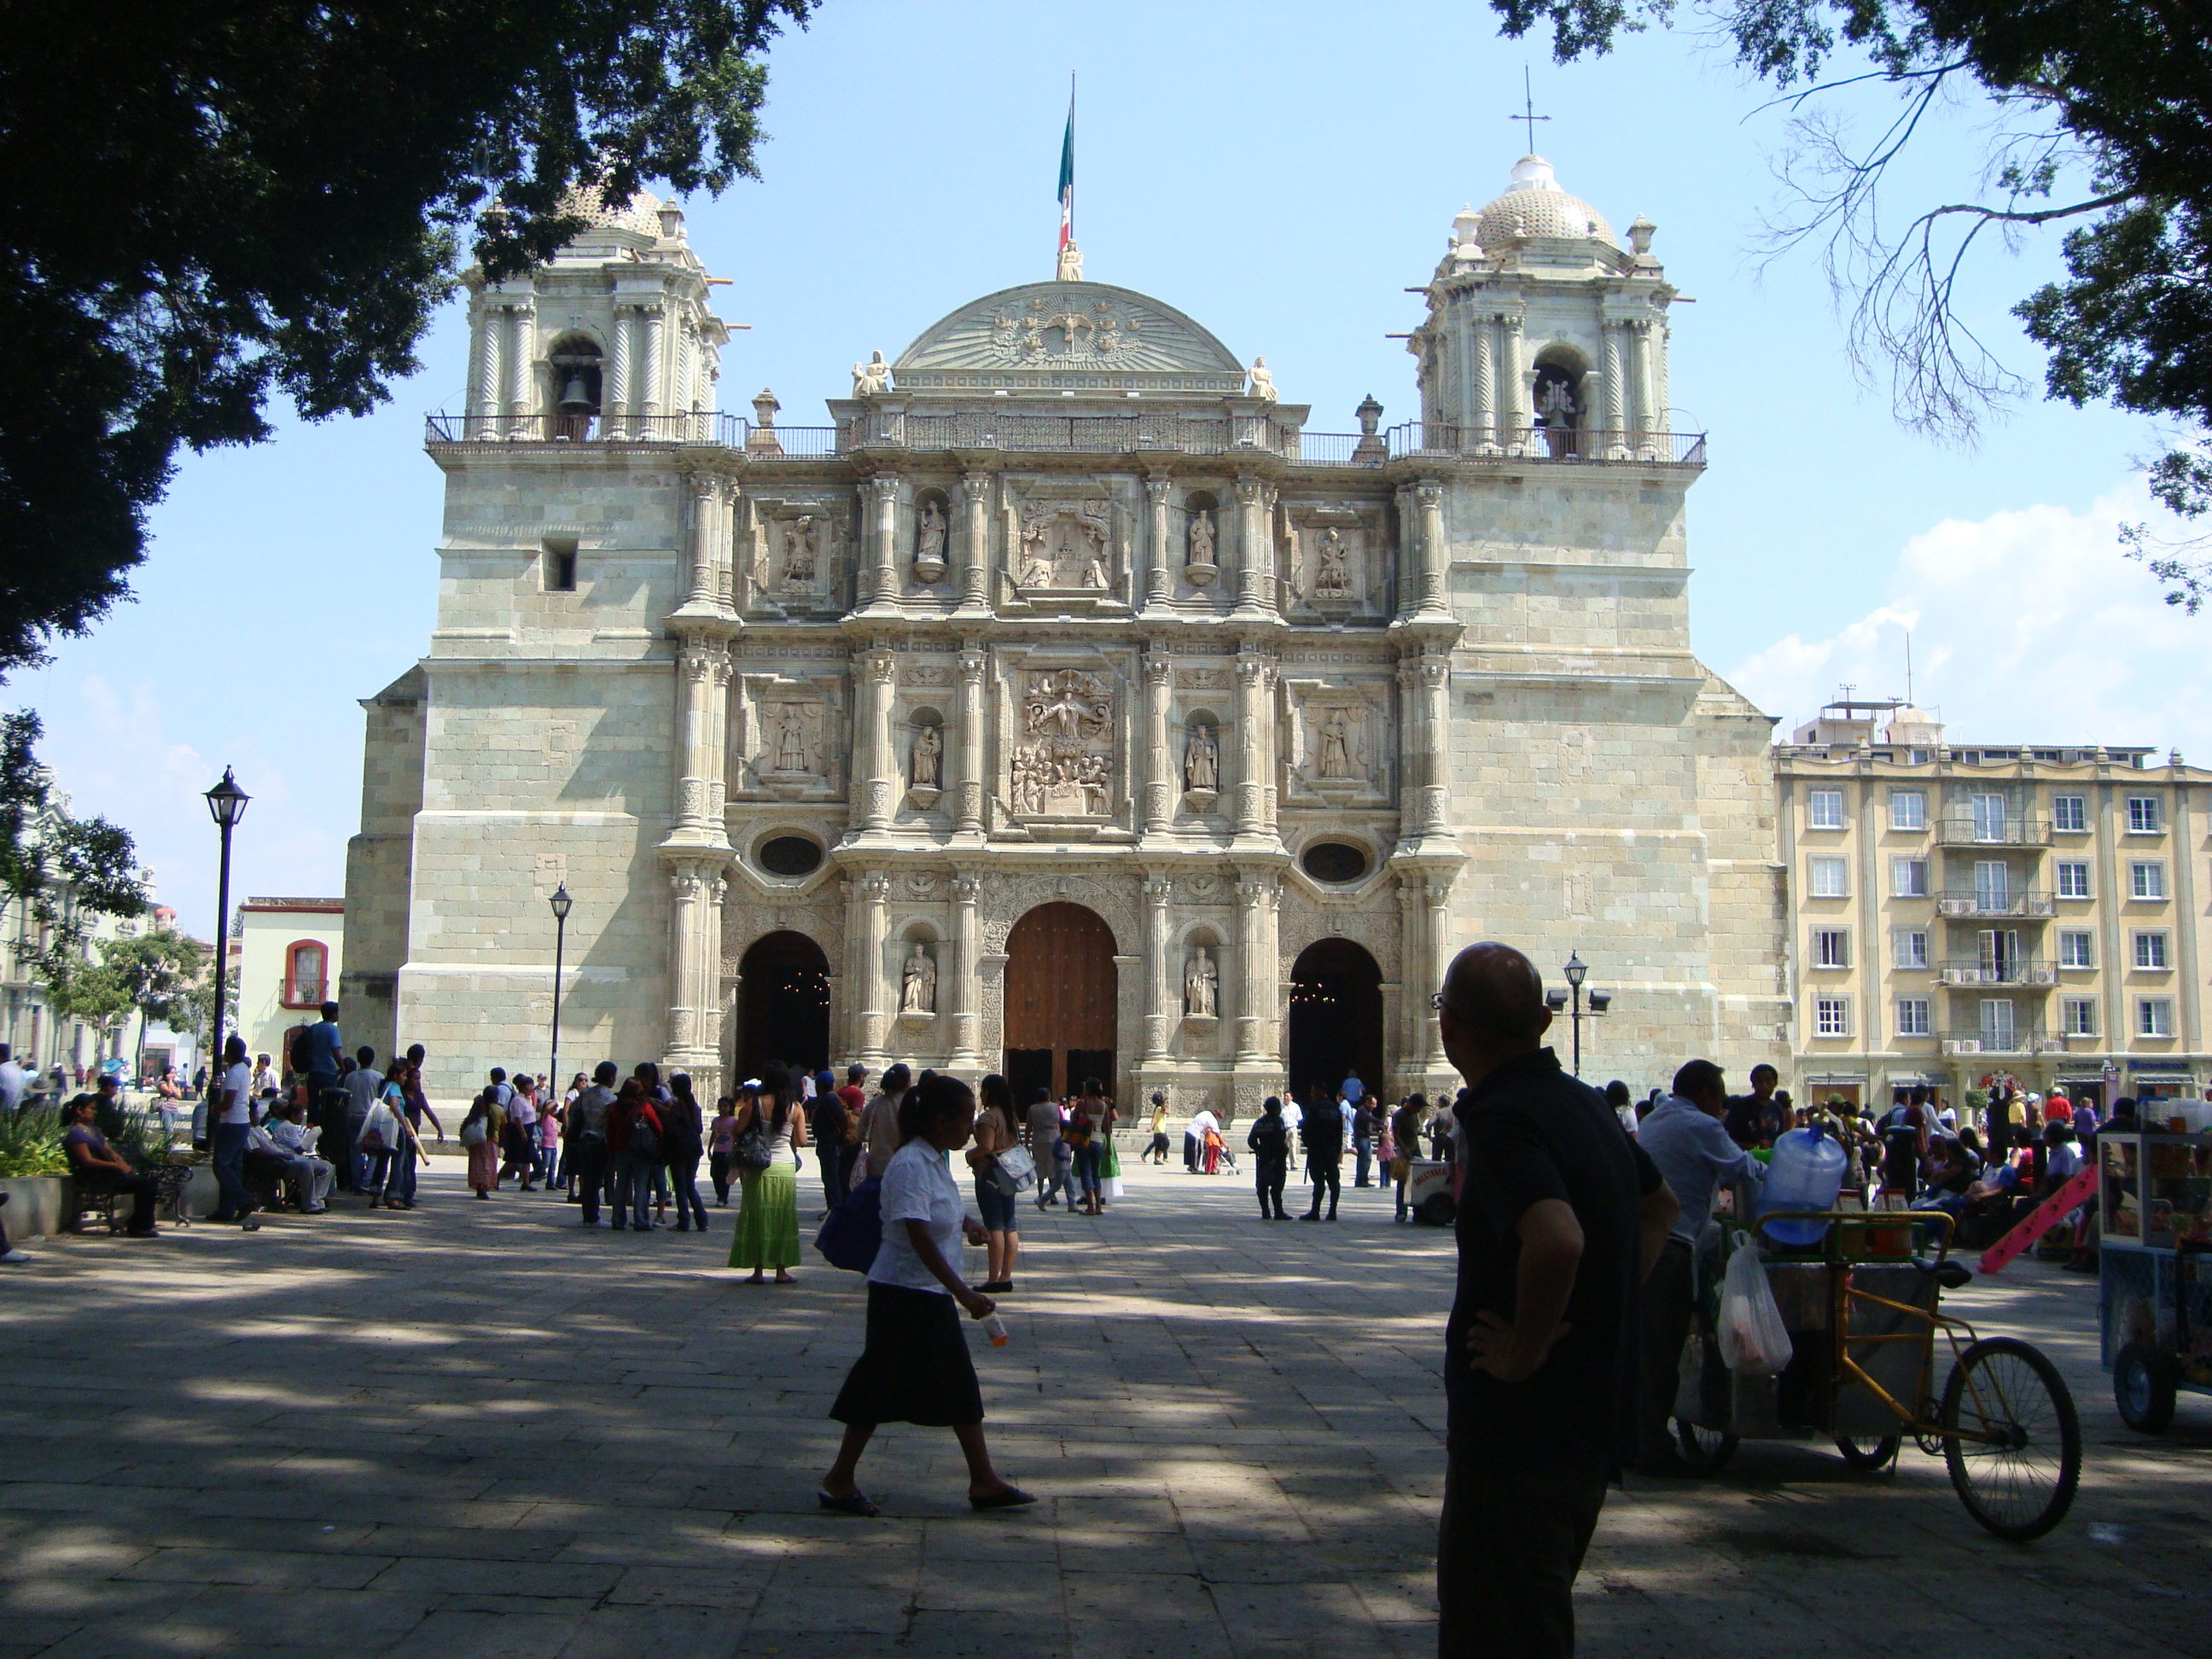 Image of Main building in the zocalo